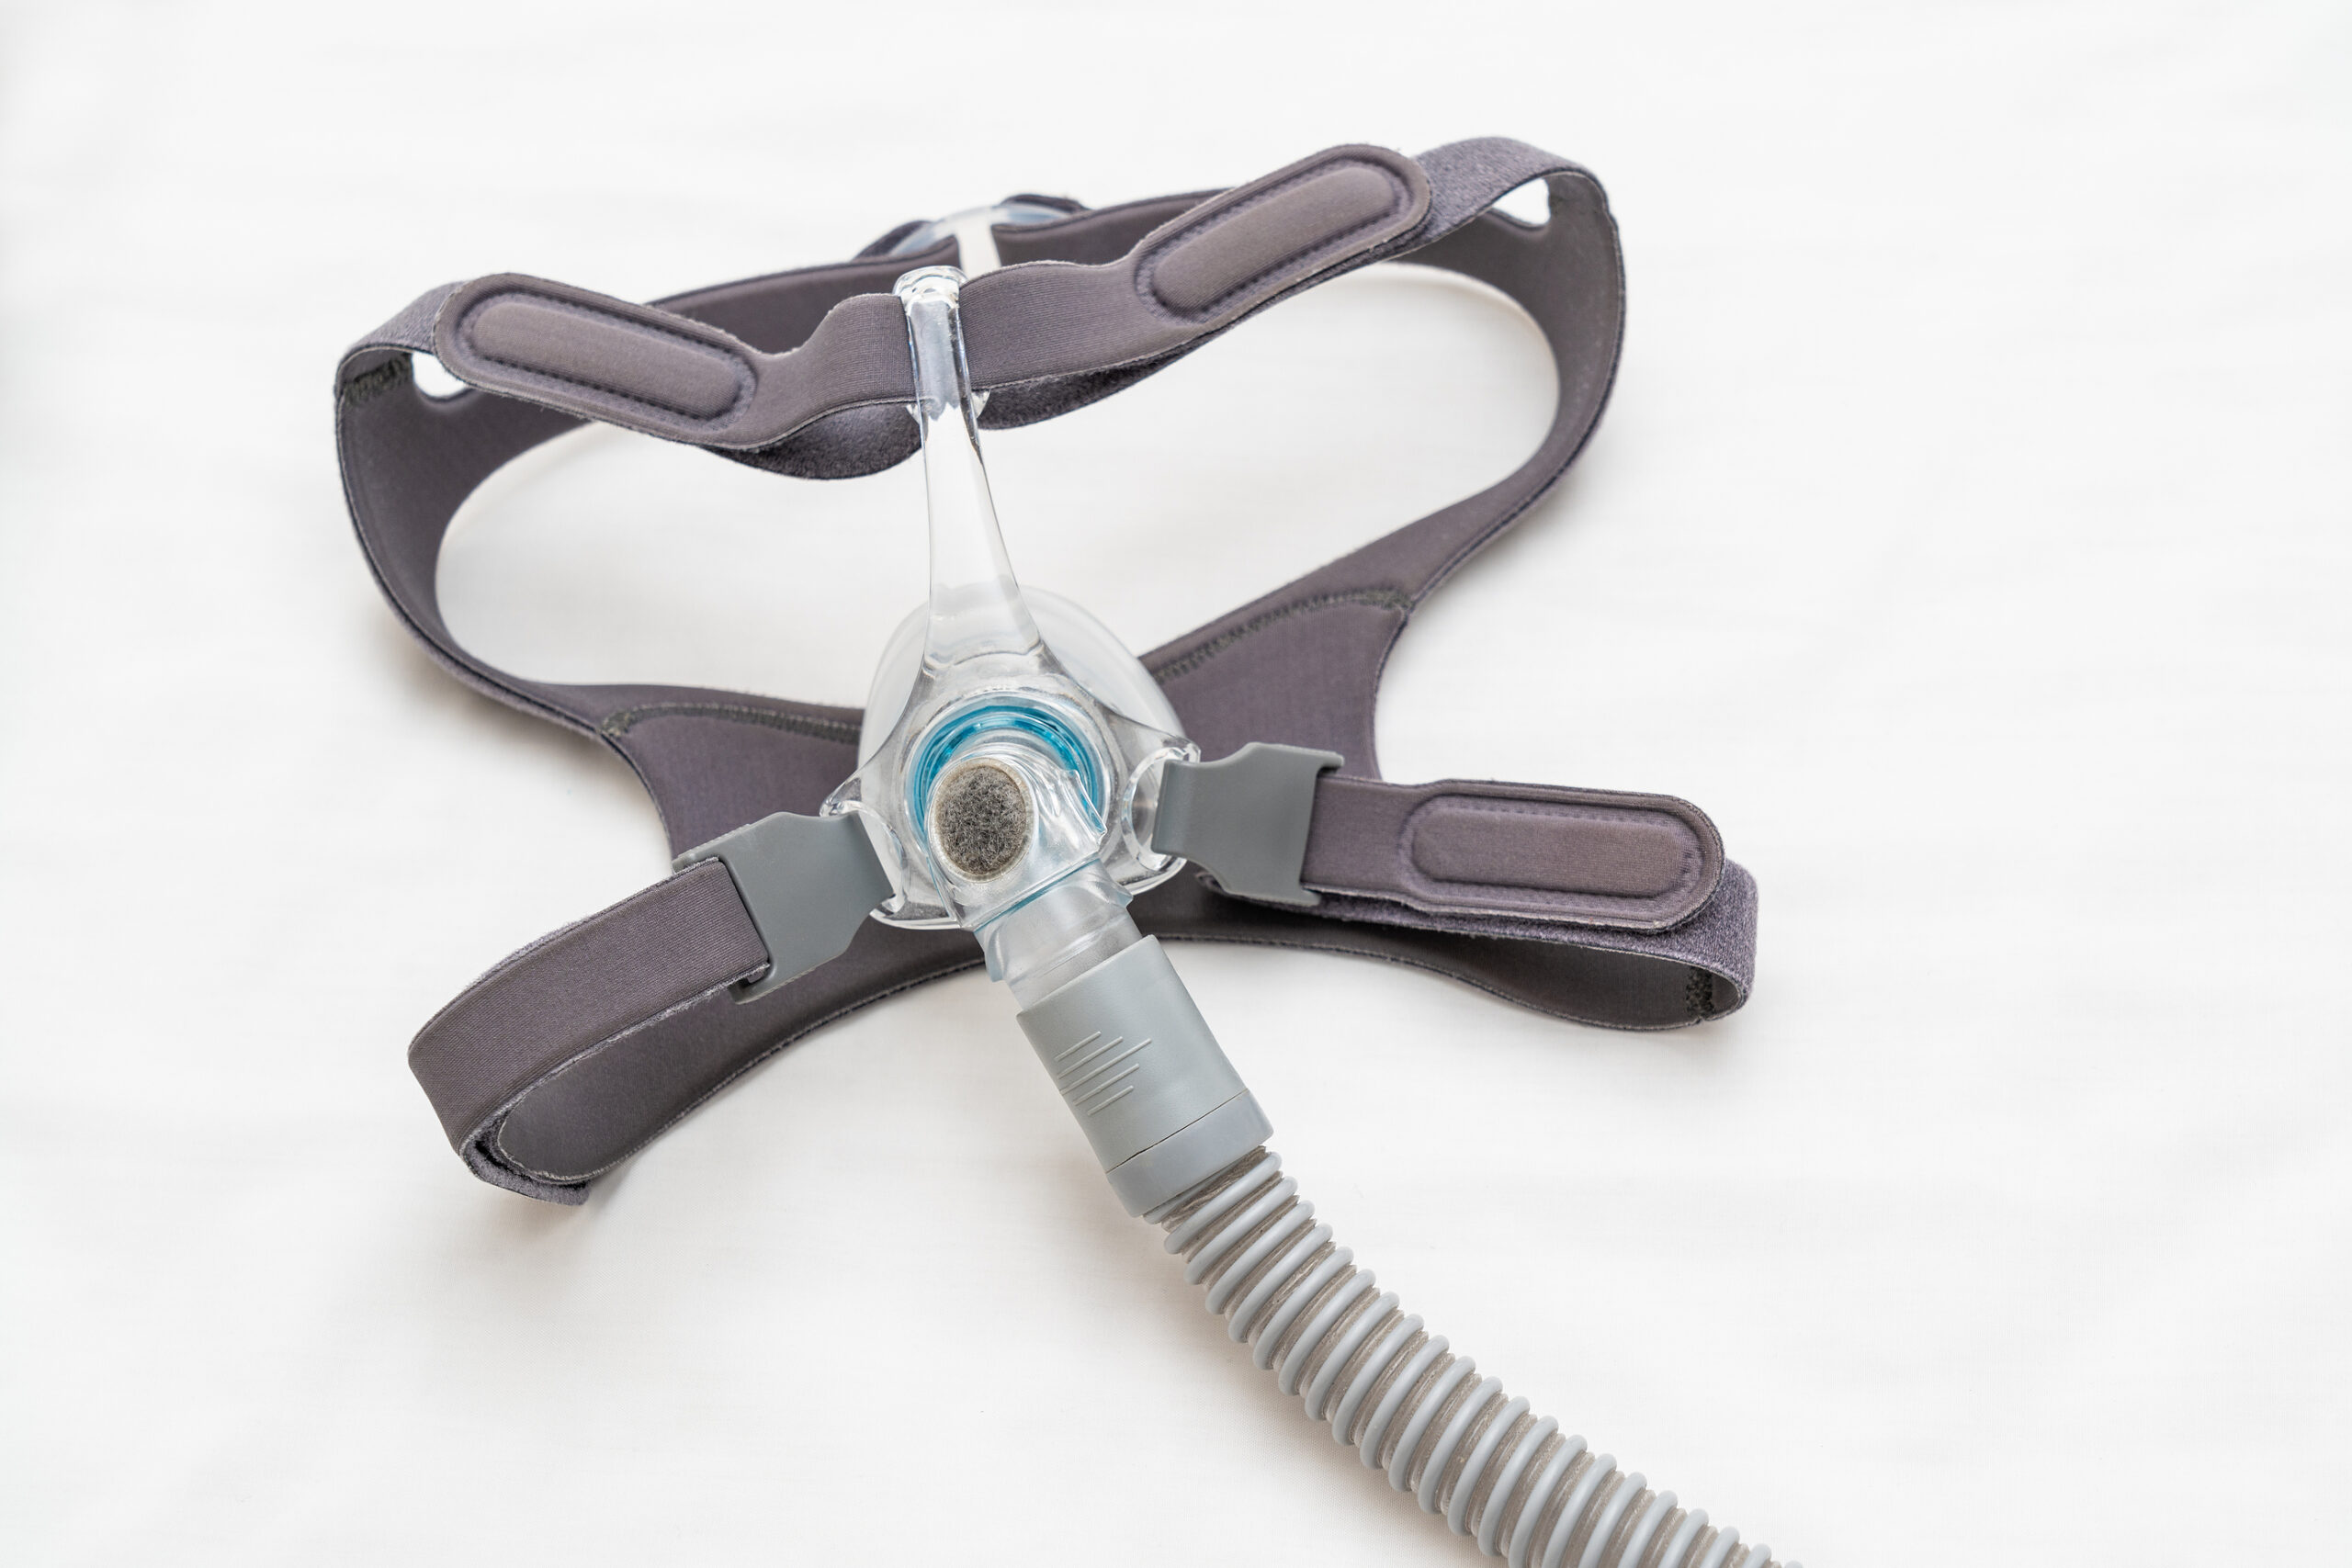 Lawsuit Alleges CPAP Devices Caused Mouth Cancer